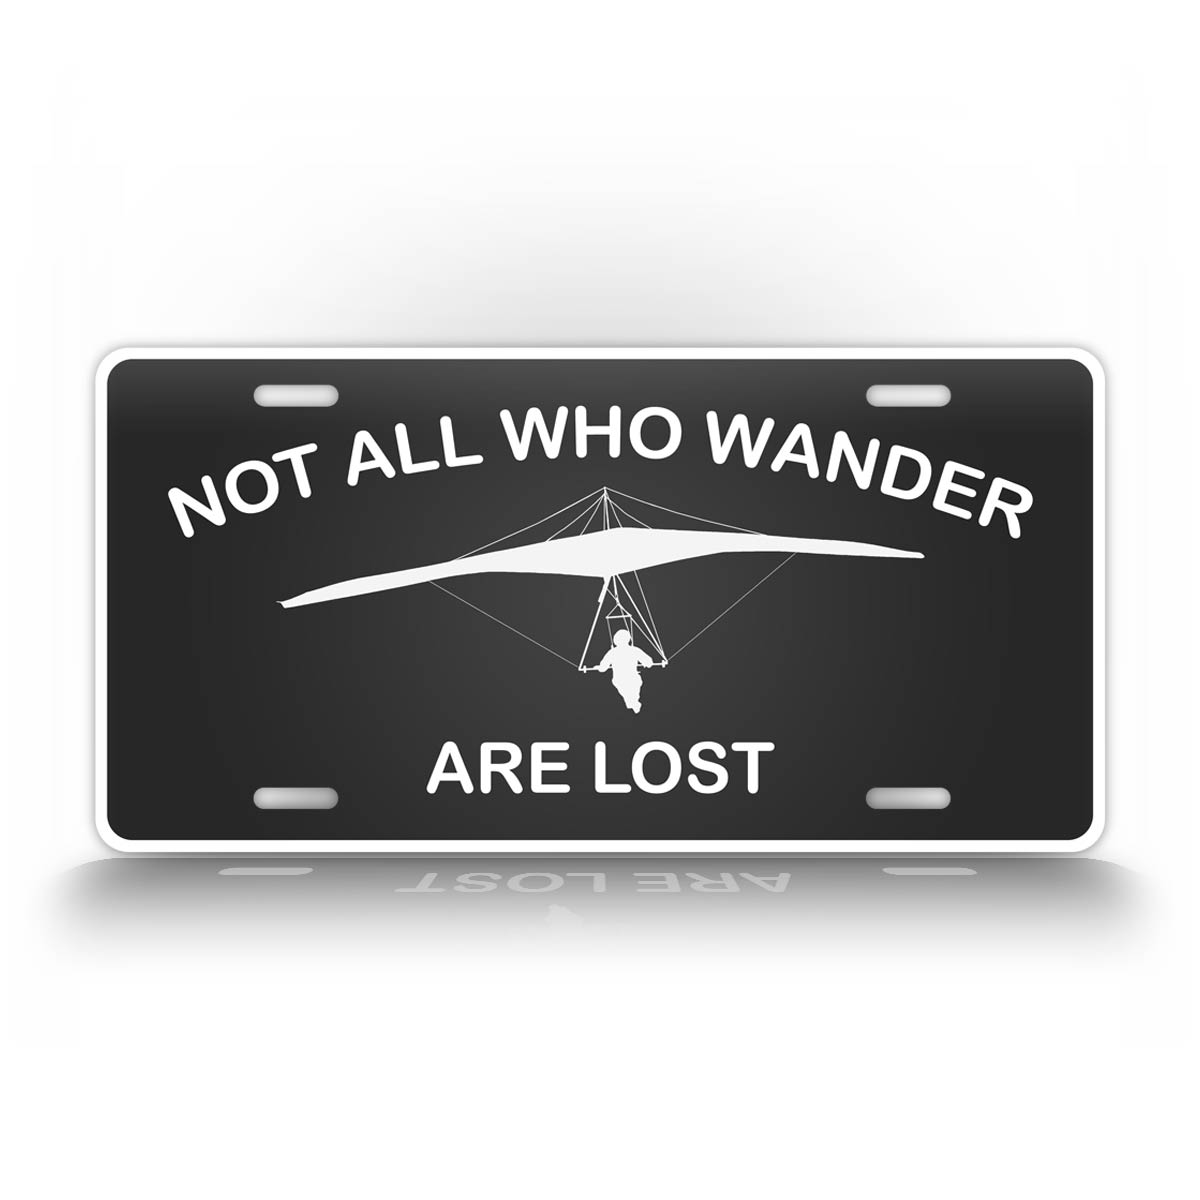 Hang Glider Pilot License Plate Not All Who Wander Are Lost 